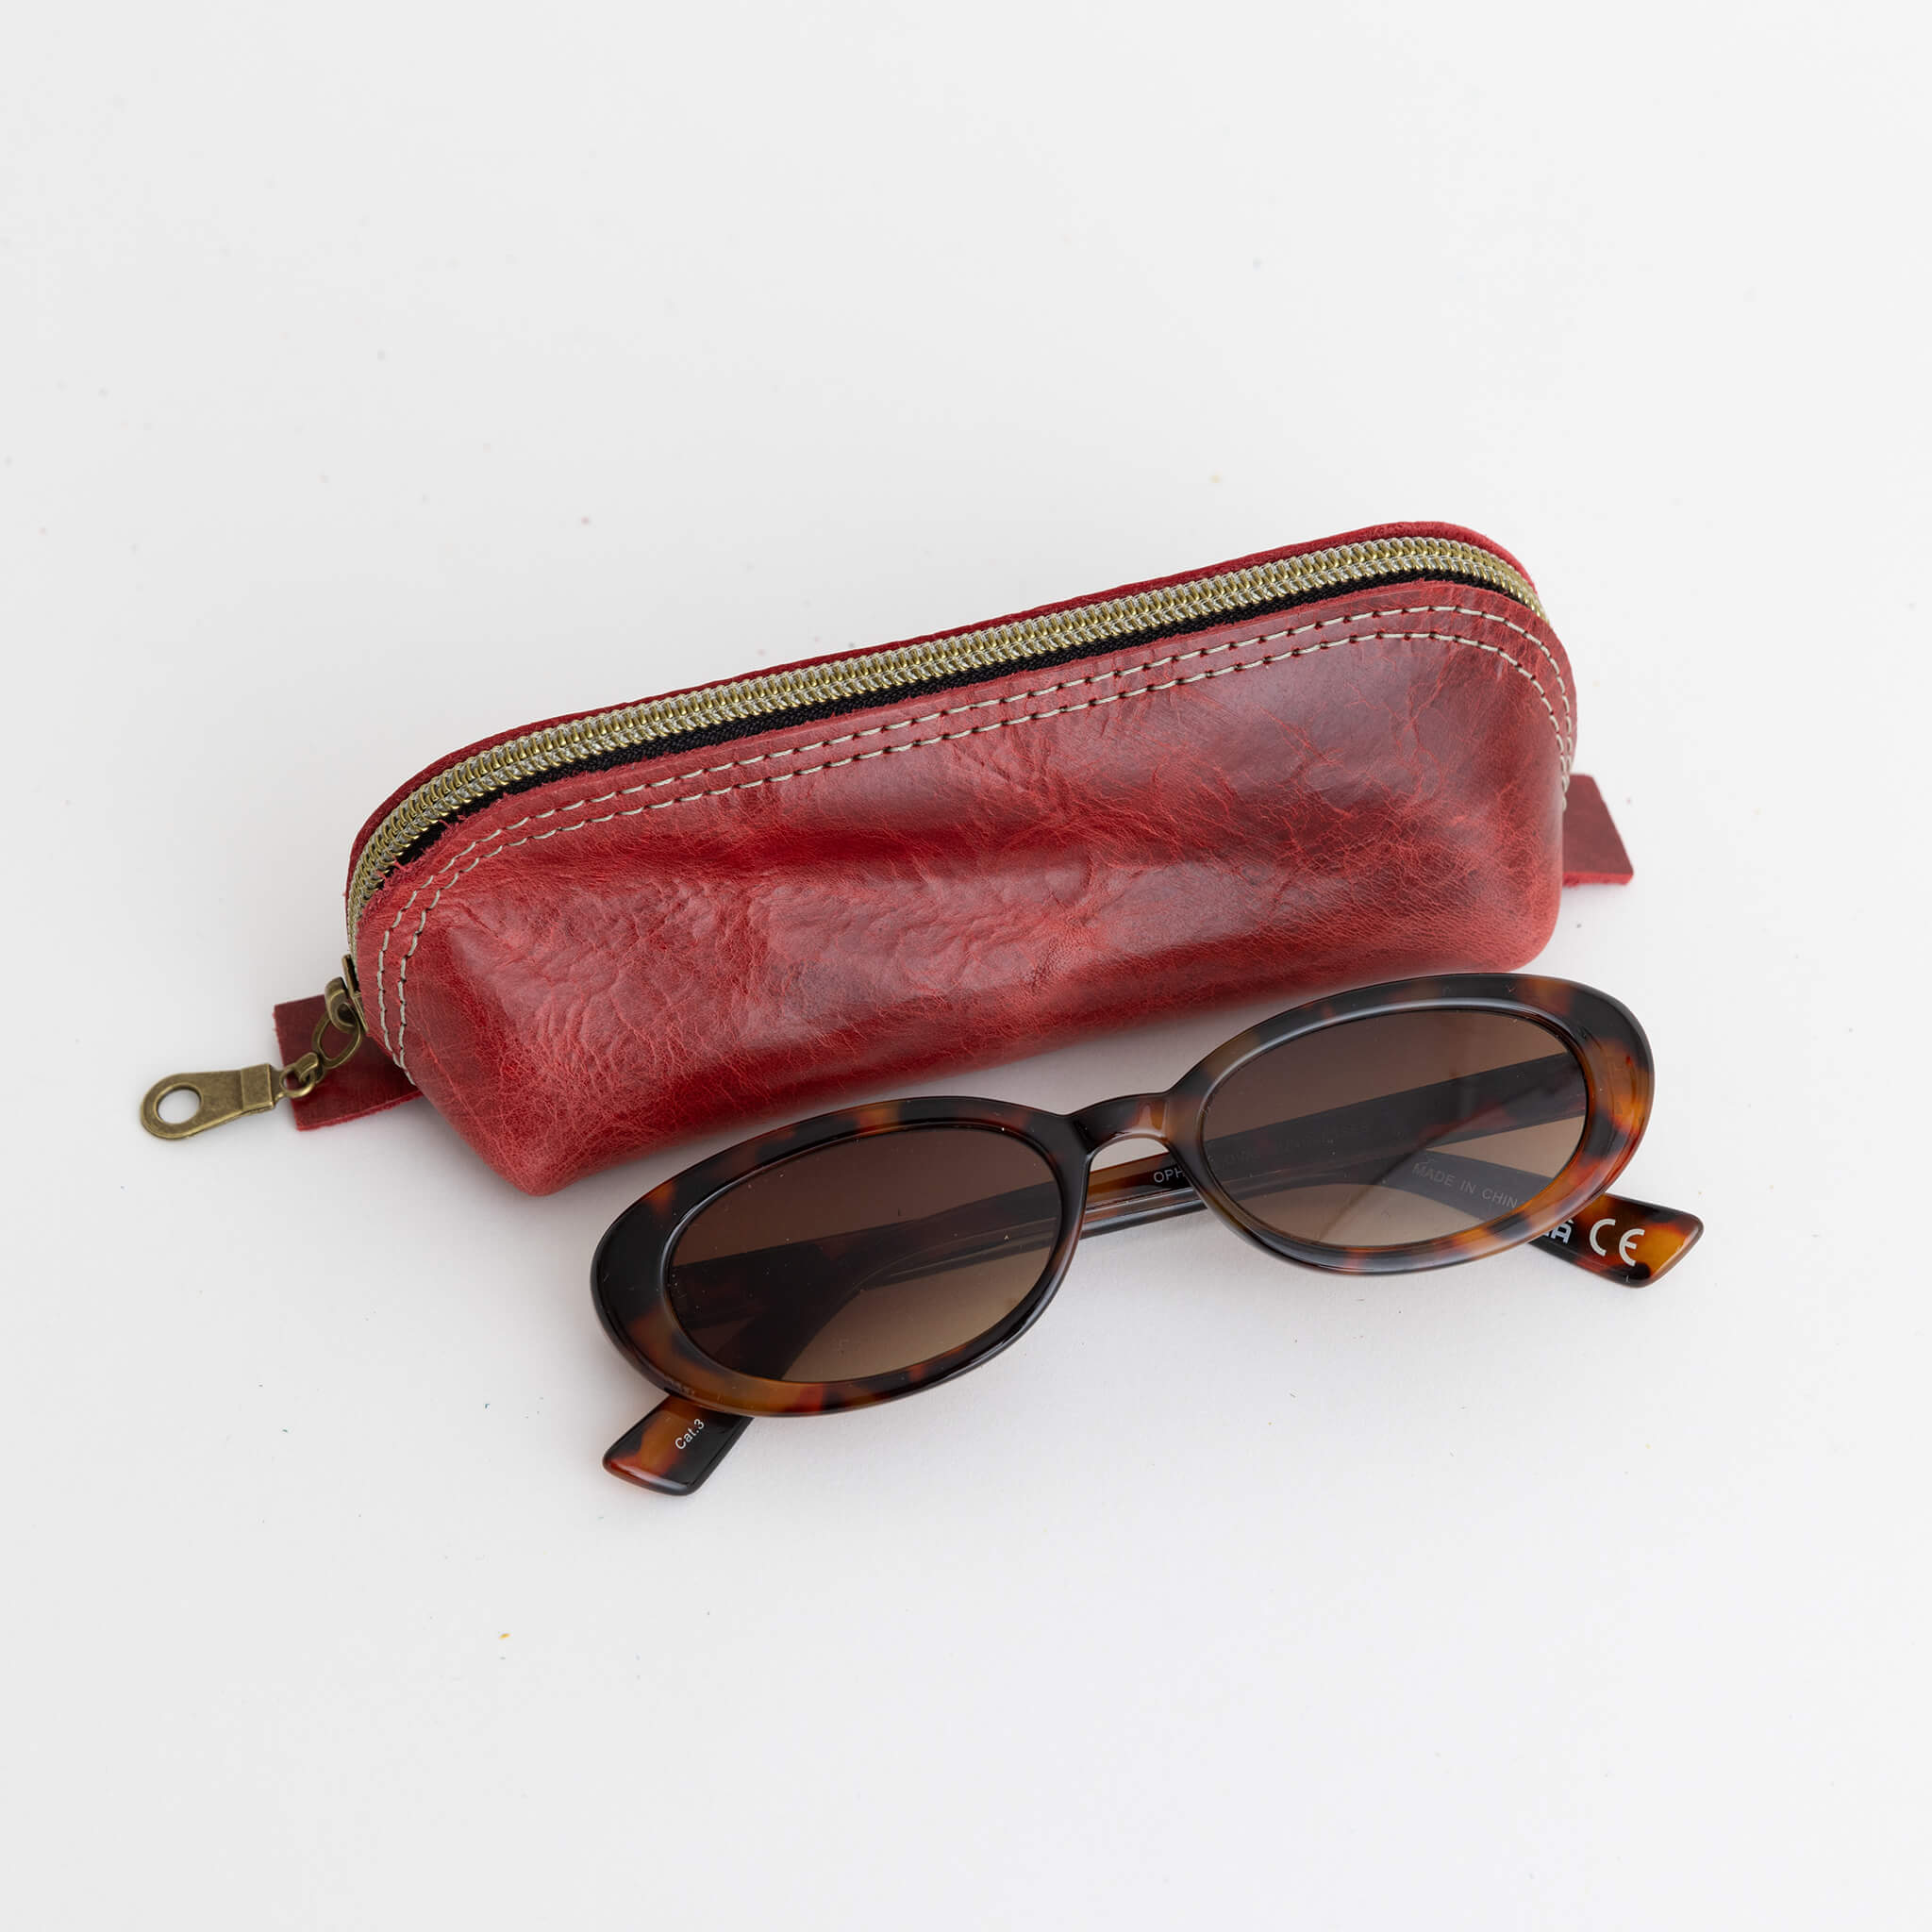 shelby pouch - zipper case - handmade leather - cardinal front view